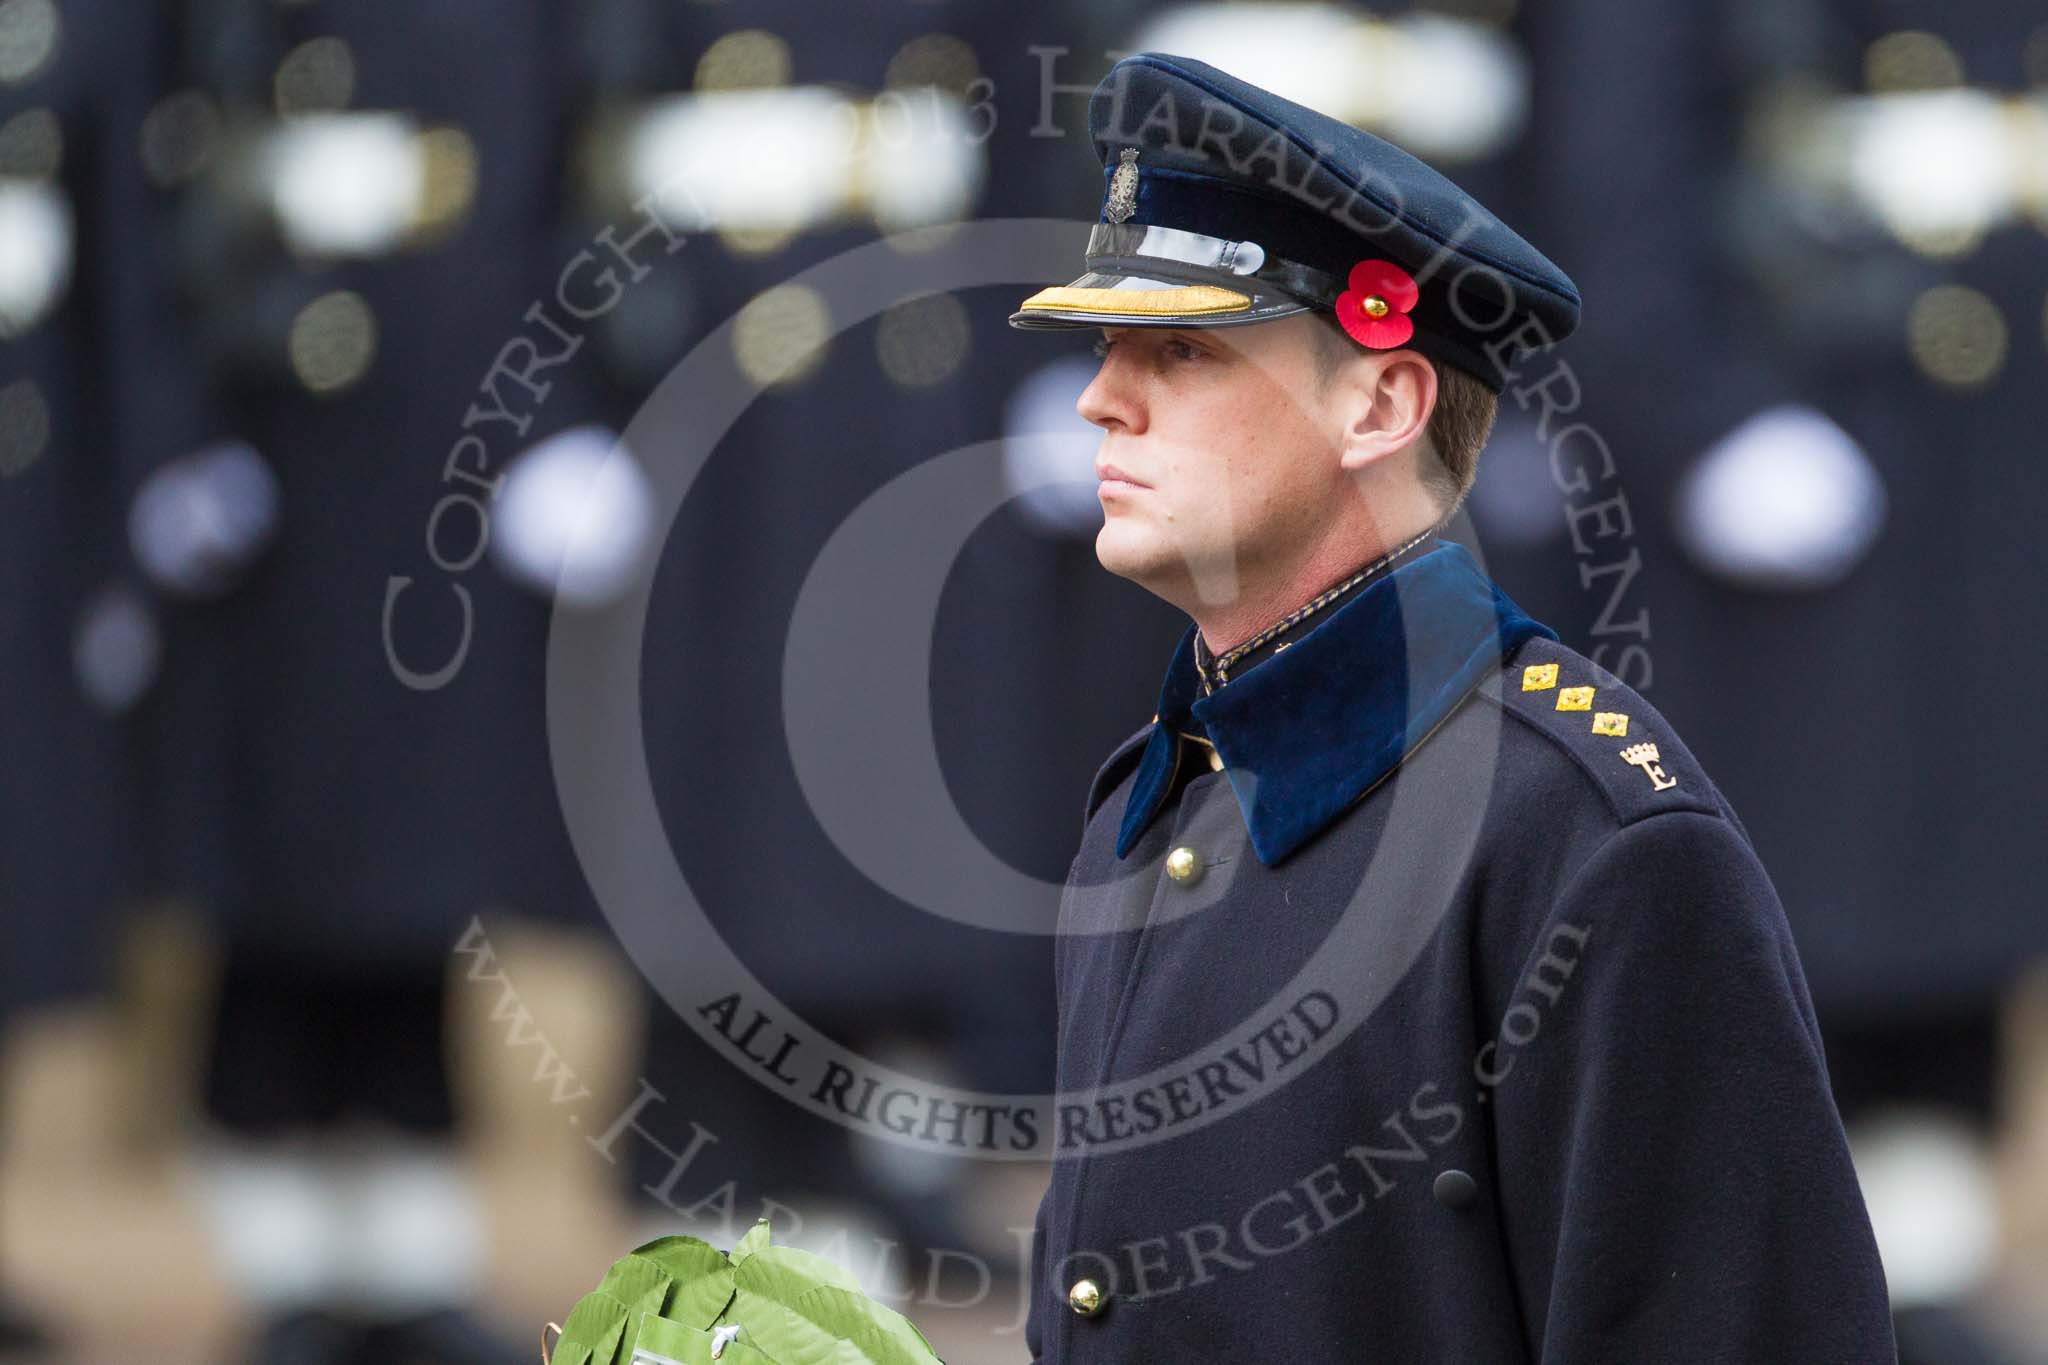 Remembrance Sunday at the Cenotaph 2015: Captain Hugh Vere Nicoll, equerry to the Duke of Essex. Image #170, 08 November 2015 11:03 Whitehall, London, UK